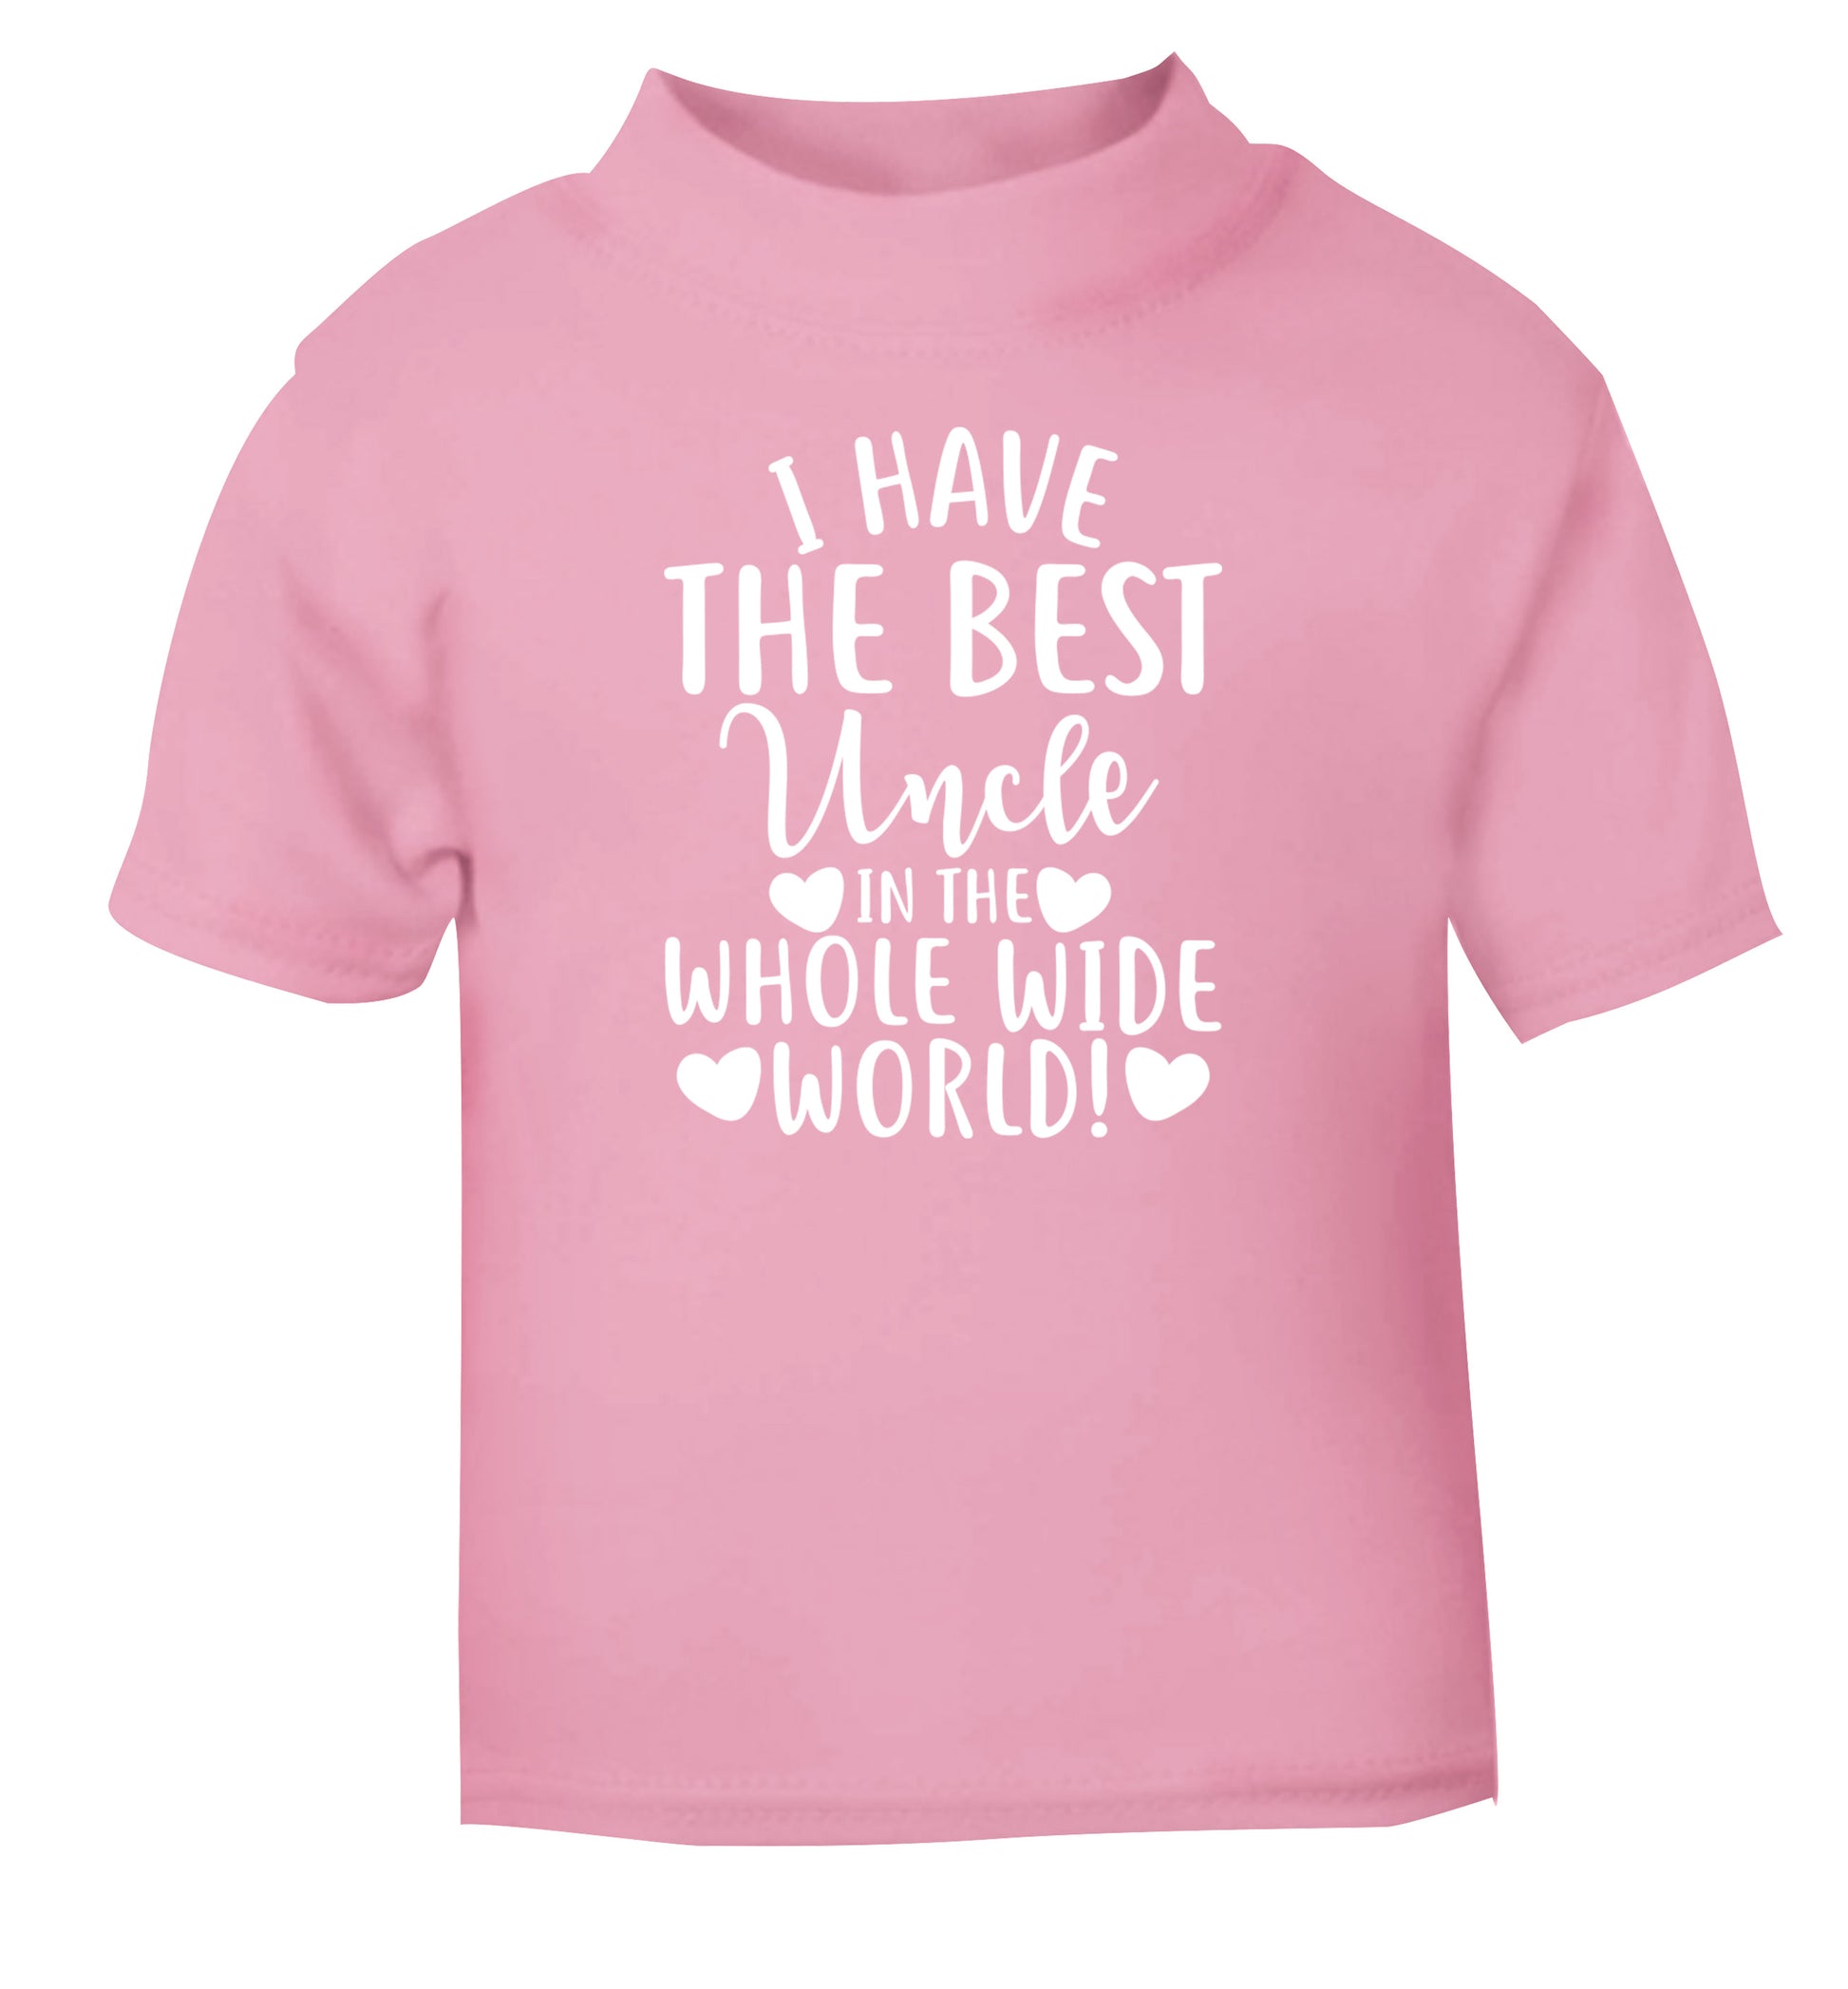 I have the best uncle in the whole wide world! light pink Baby Toddler Tshirt 2 Years